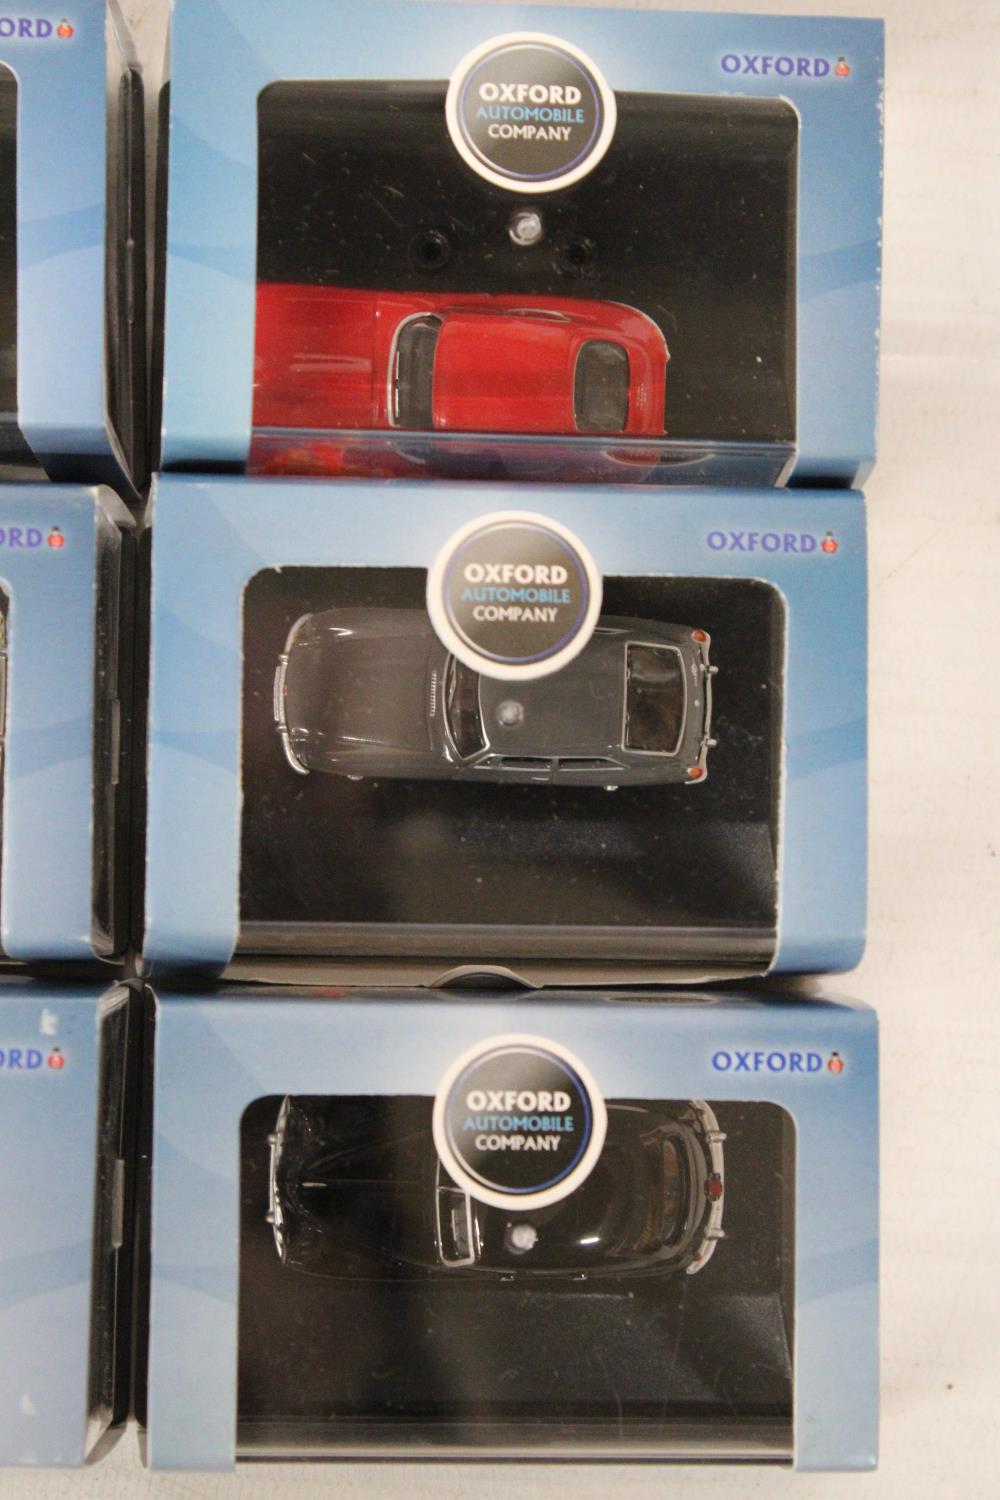 SIX VARIOUS AS NEW AND BOXED OXFORD AUTOMOBILE COMPANY VEHICLES - Image 8 of 8